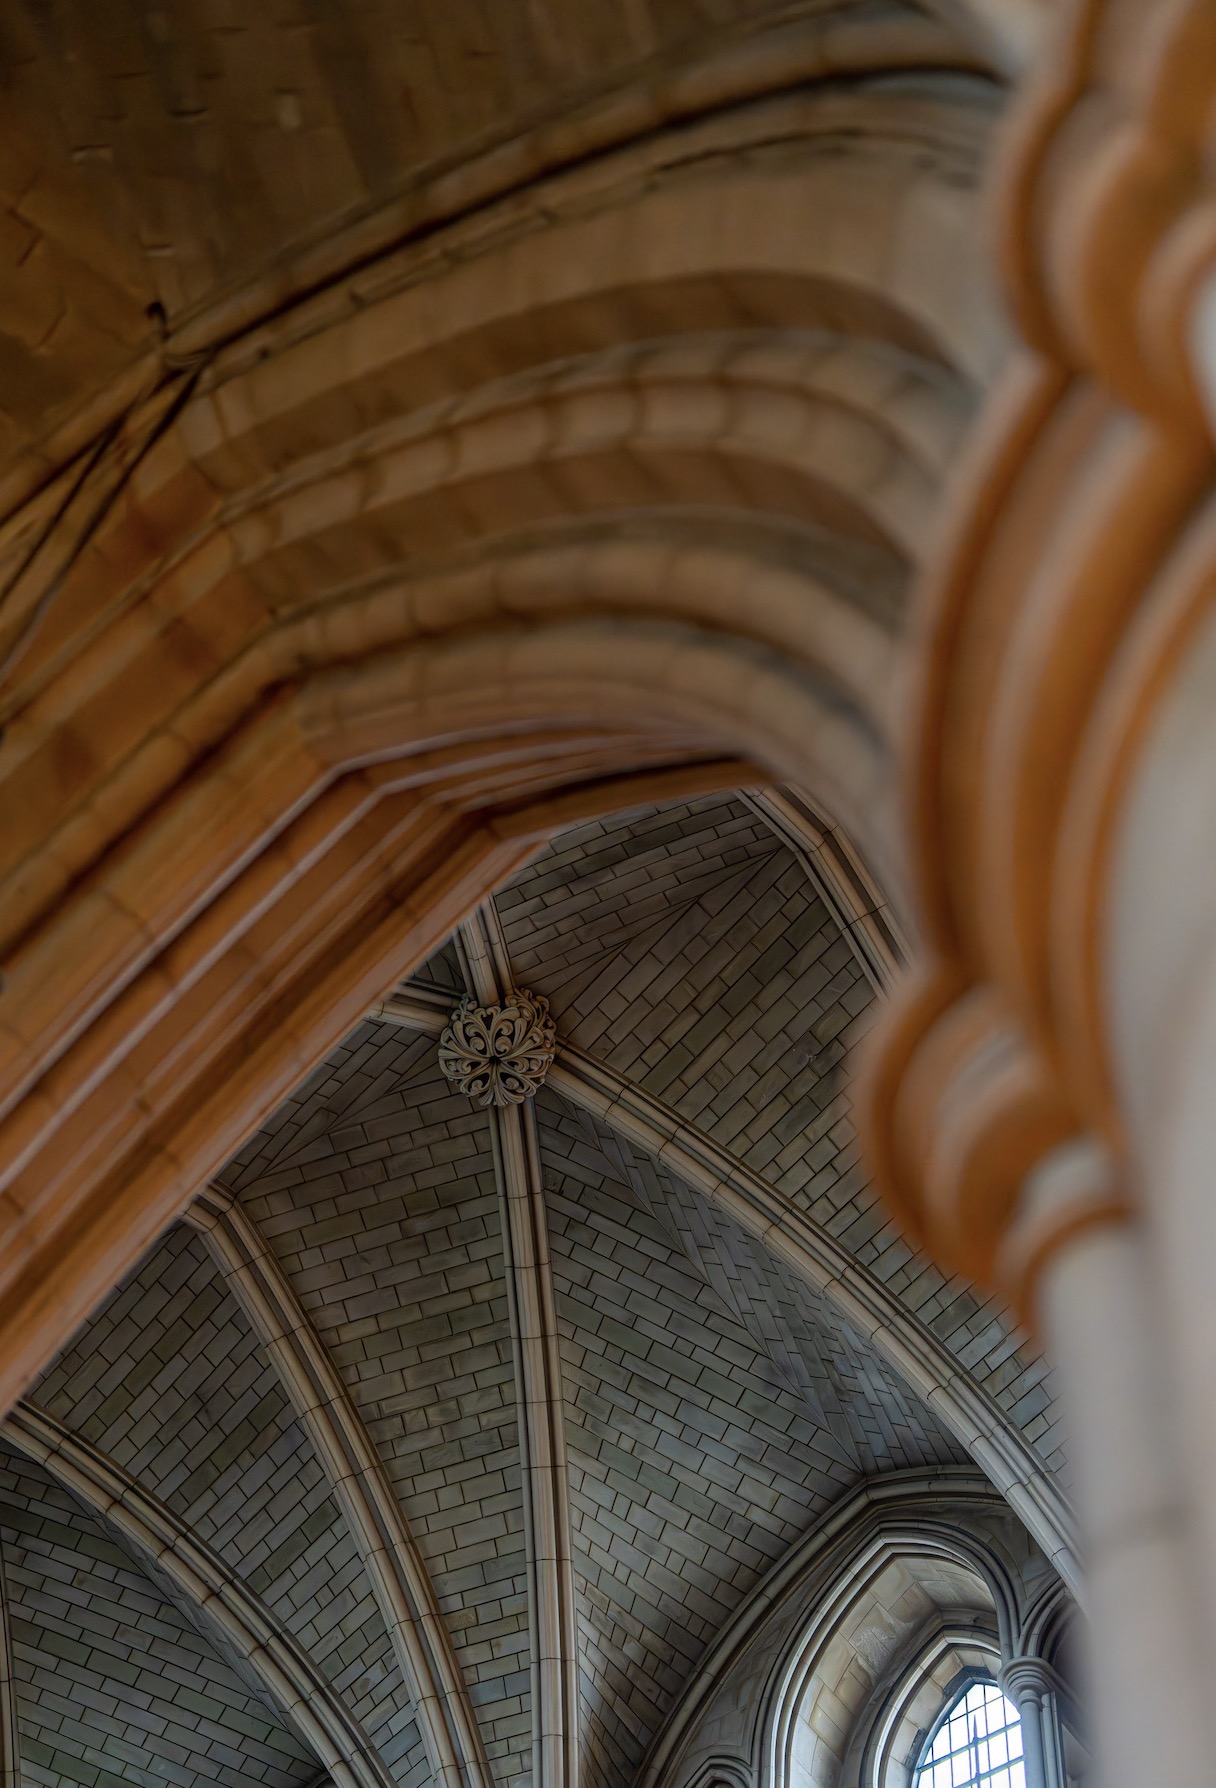 Southwark Cathedral Ceilings - Always Look Up